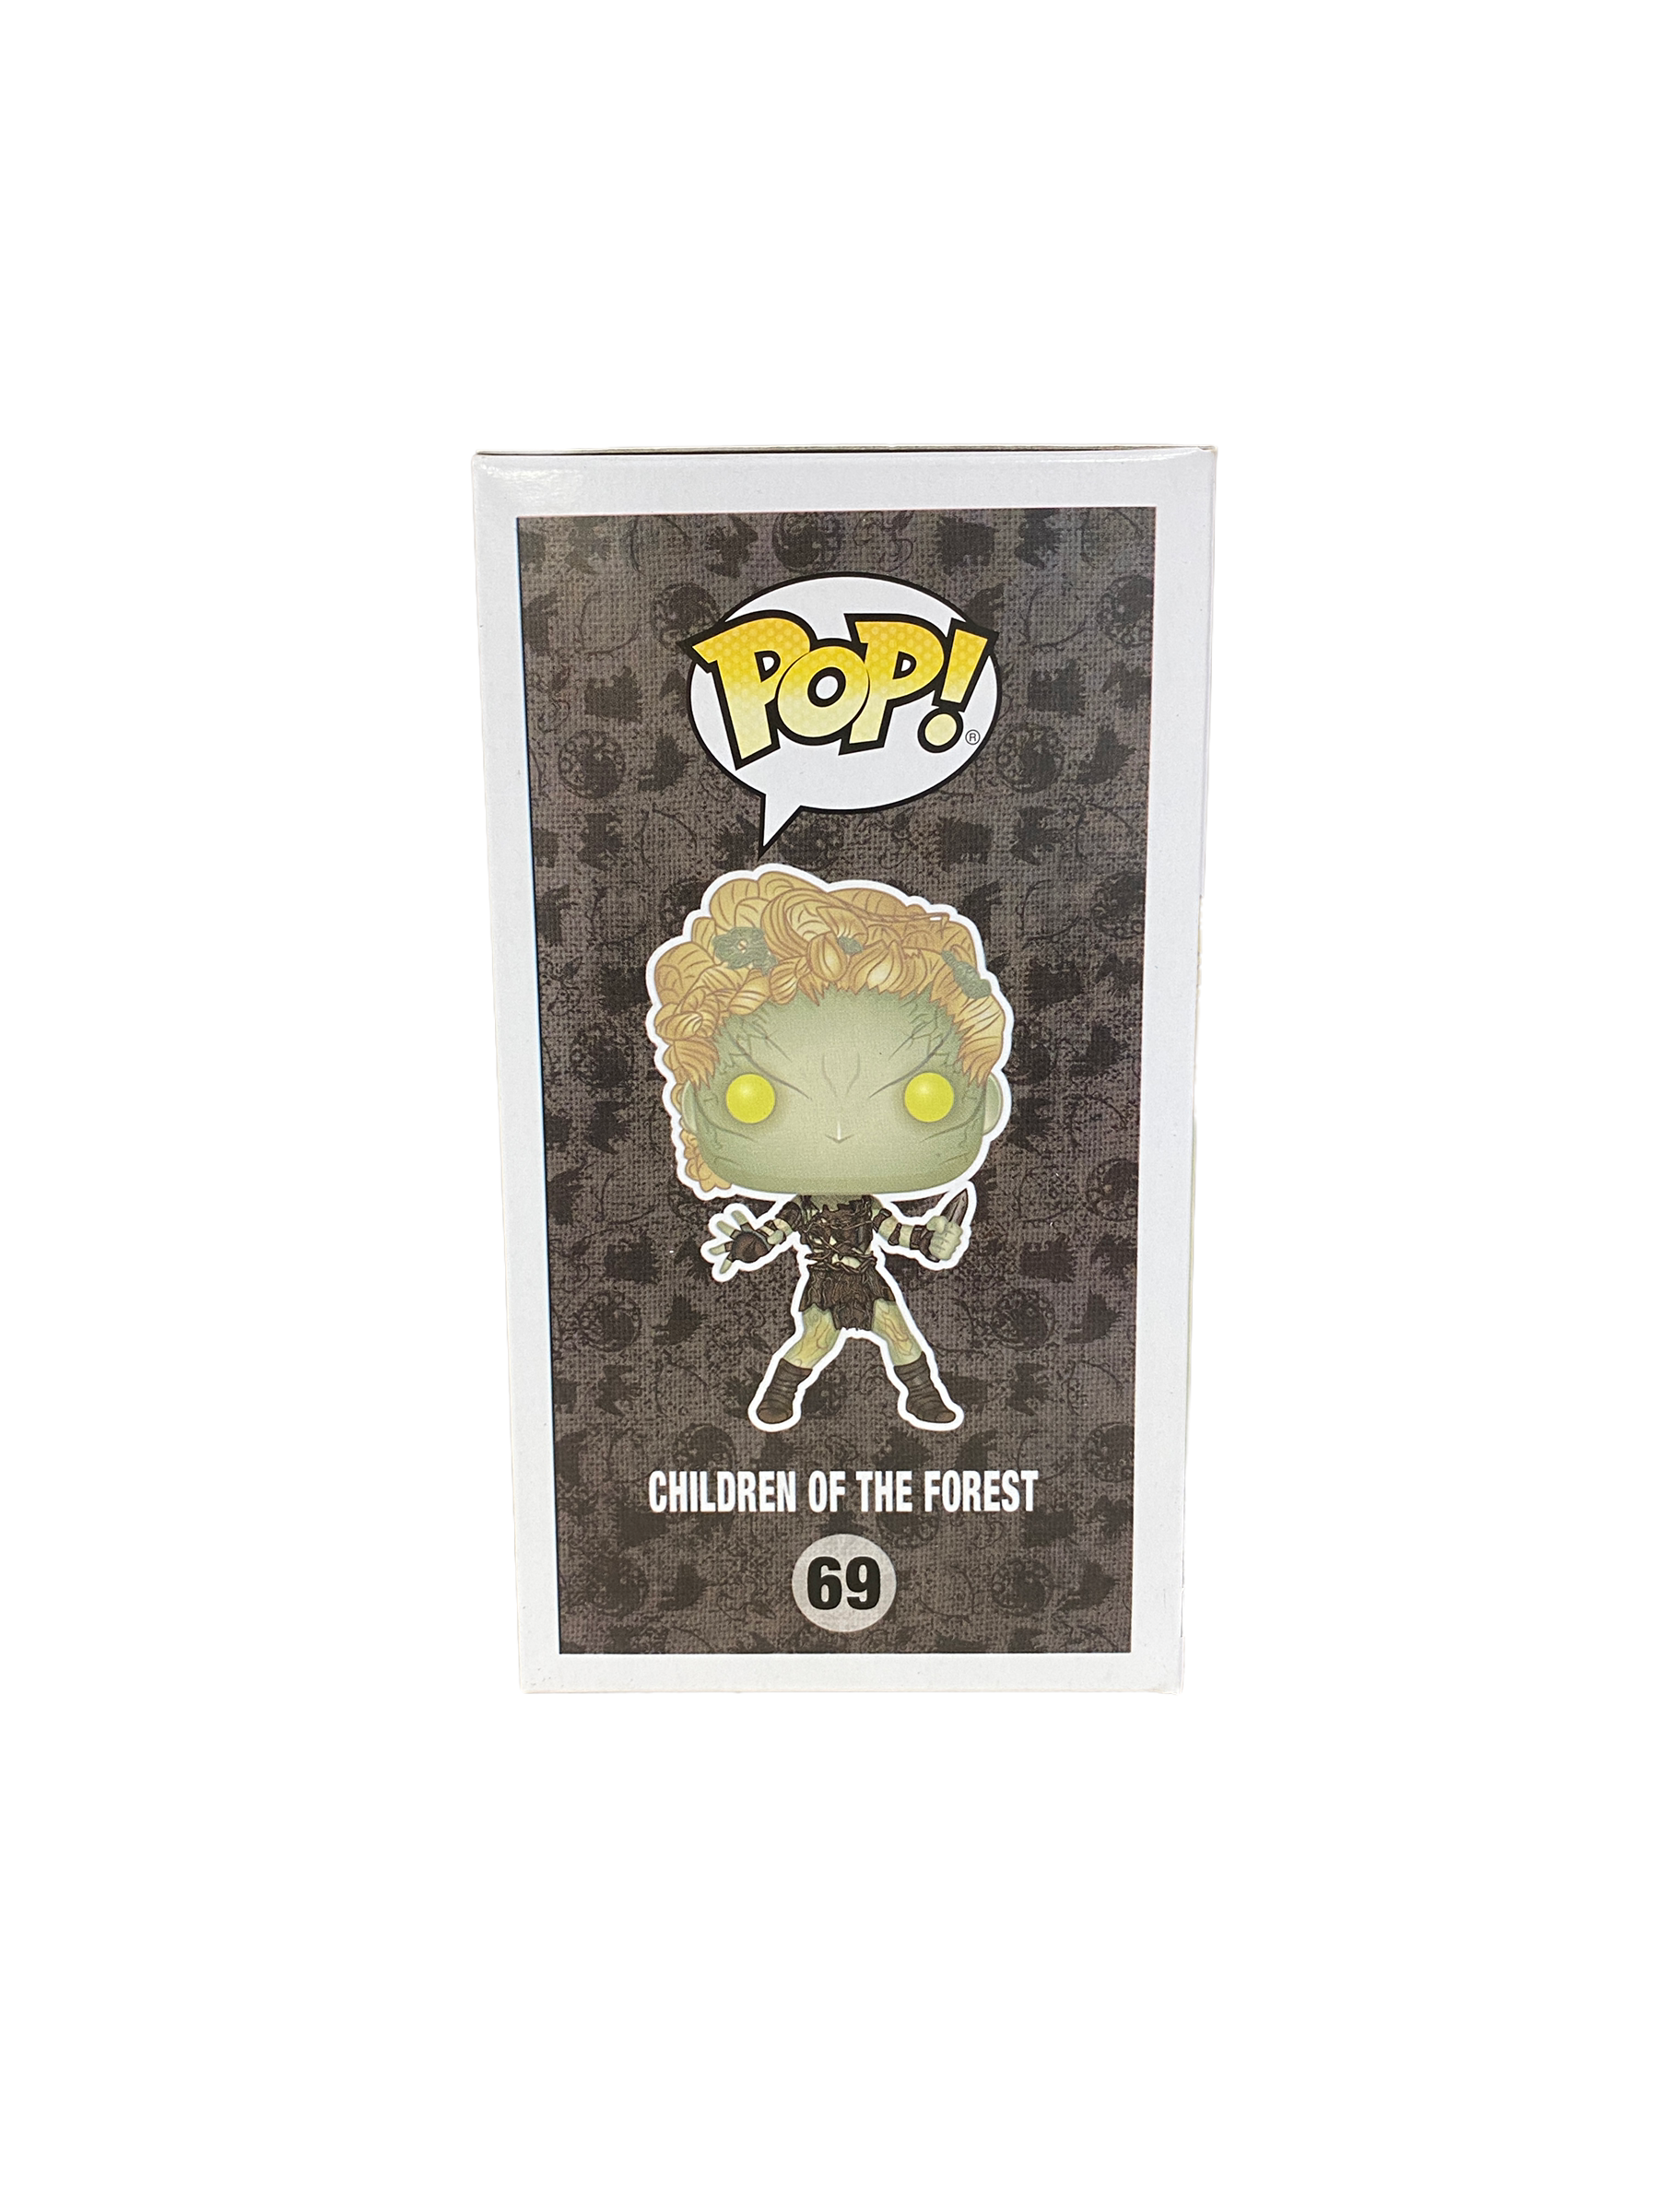 Children Of The Forest #69 (Metallic) Funko Pop! - Game Of Thrones - NYCC 2018 HBO Shop Exclusive - Condition 8.5/10